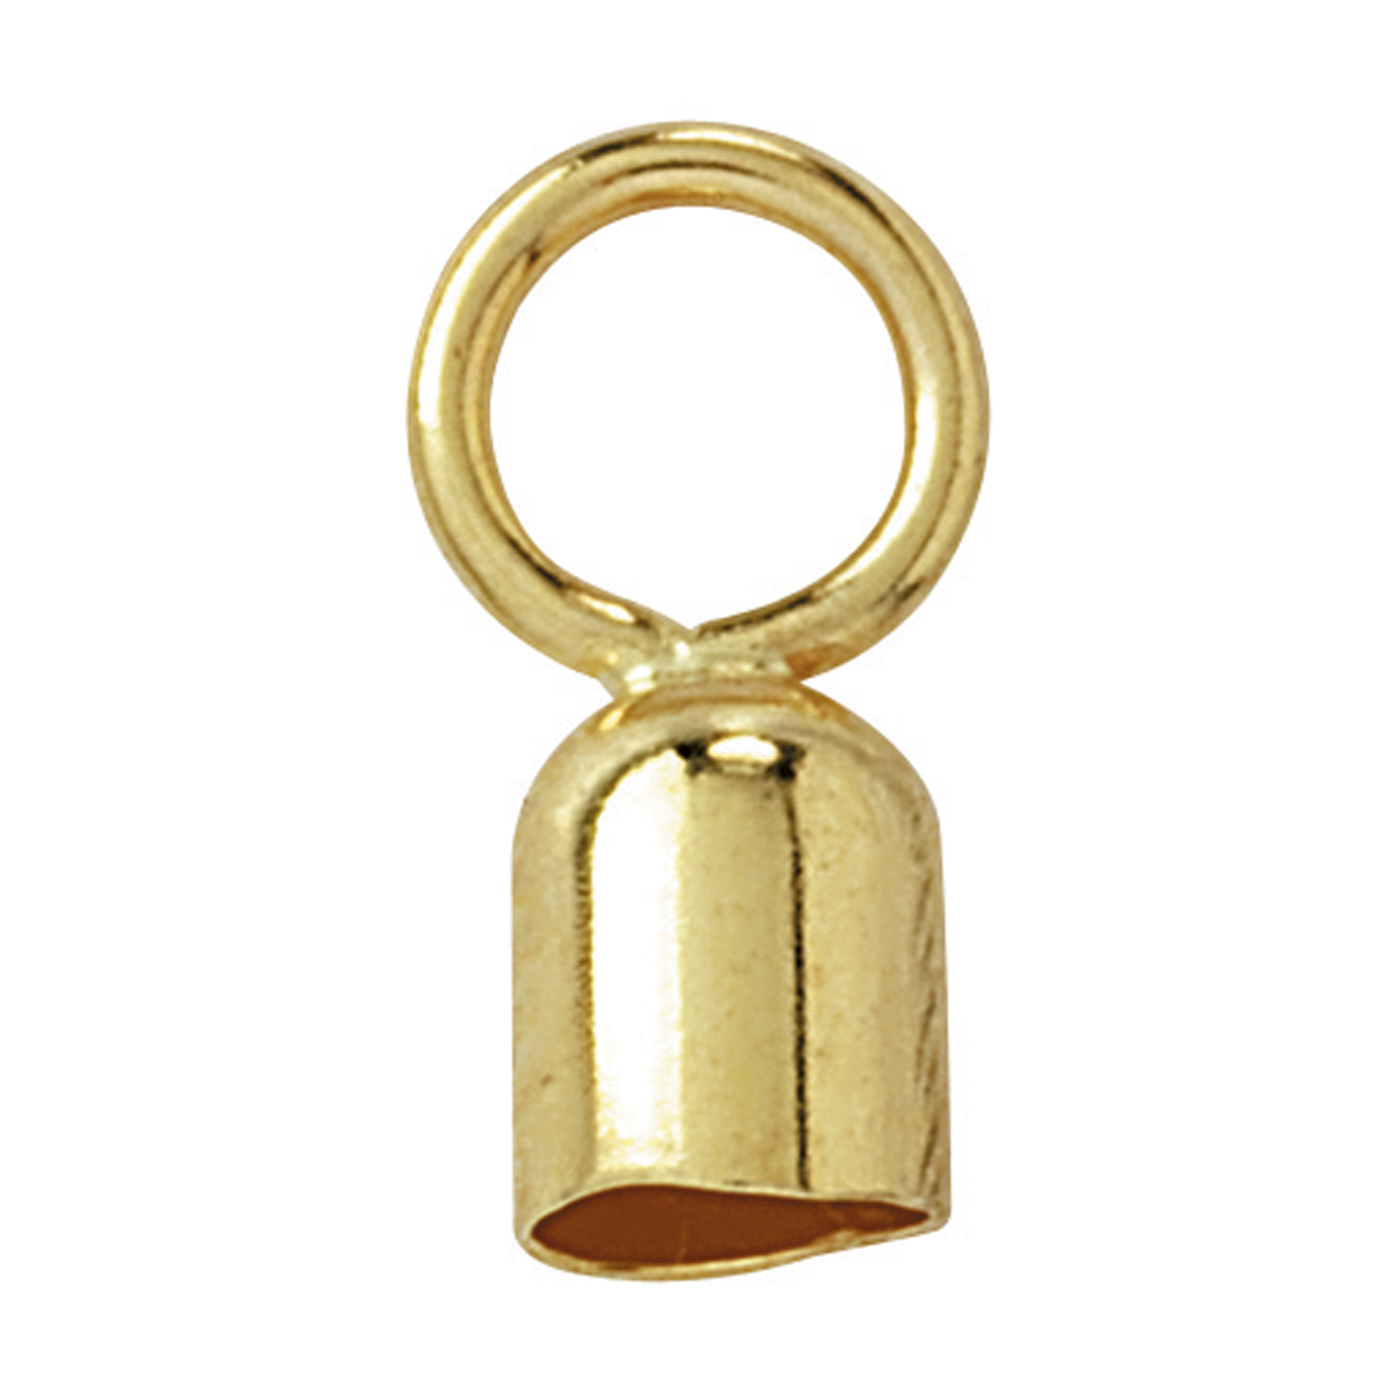 End Cap, Cylinder, Rolled Gold, ø 2 mm, Small Lug - 1 piece